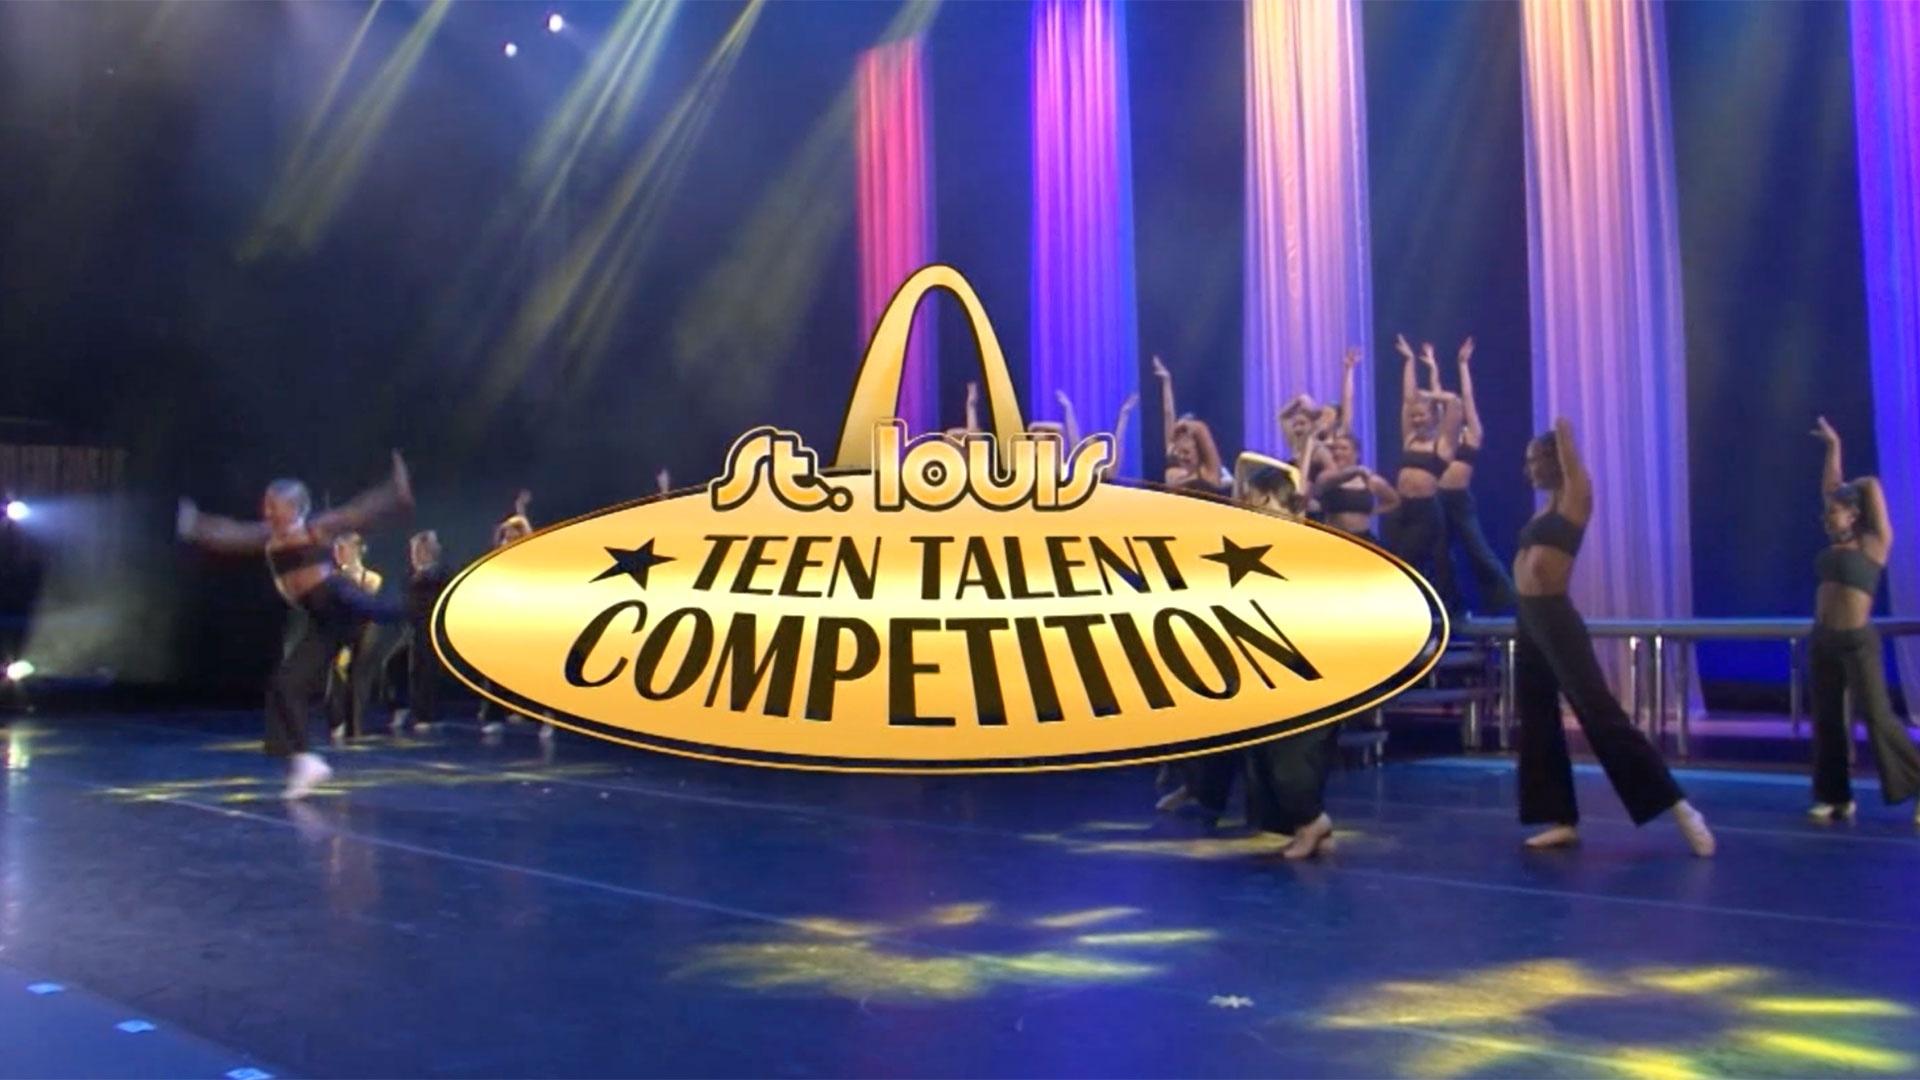 St. Louis Teen Talent Competition 2022